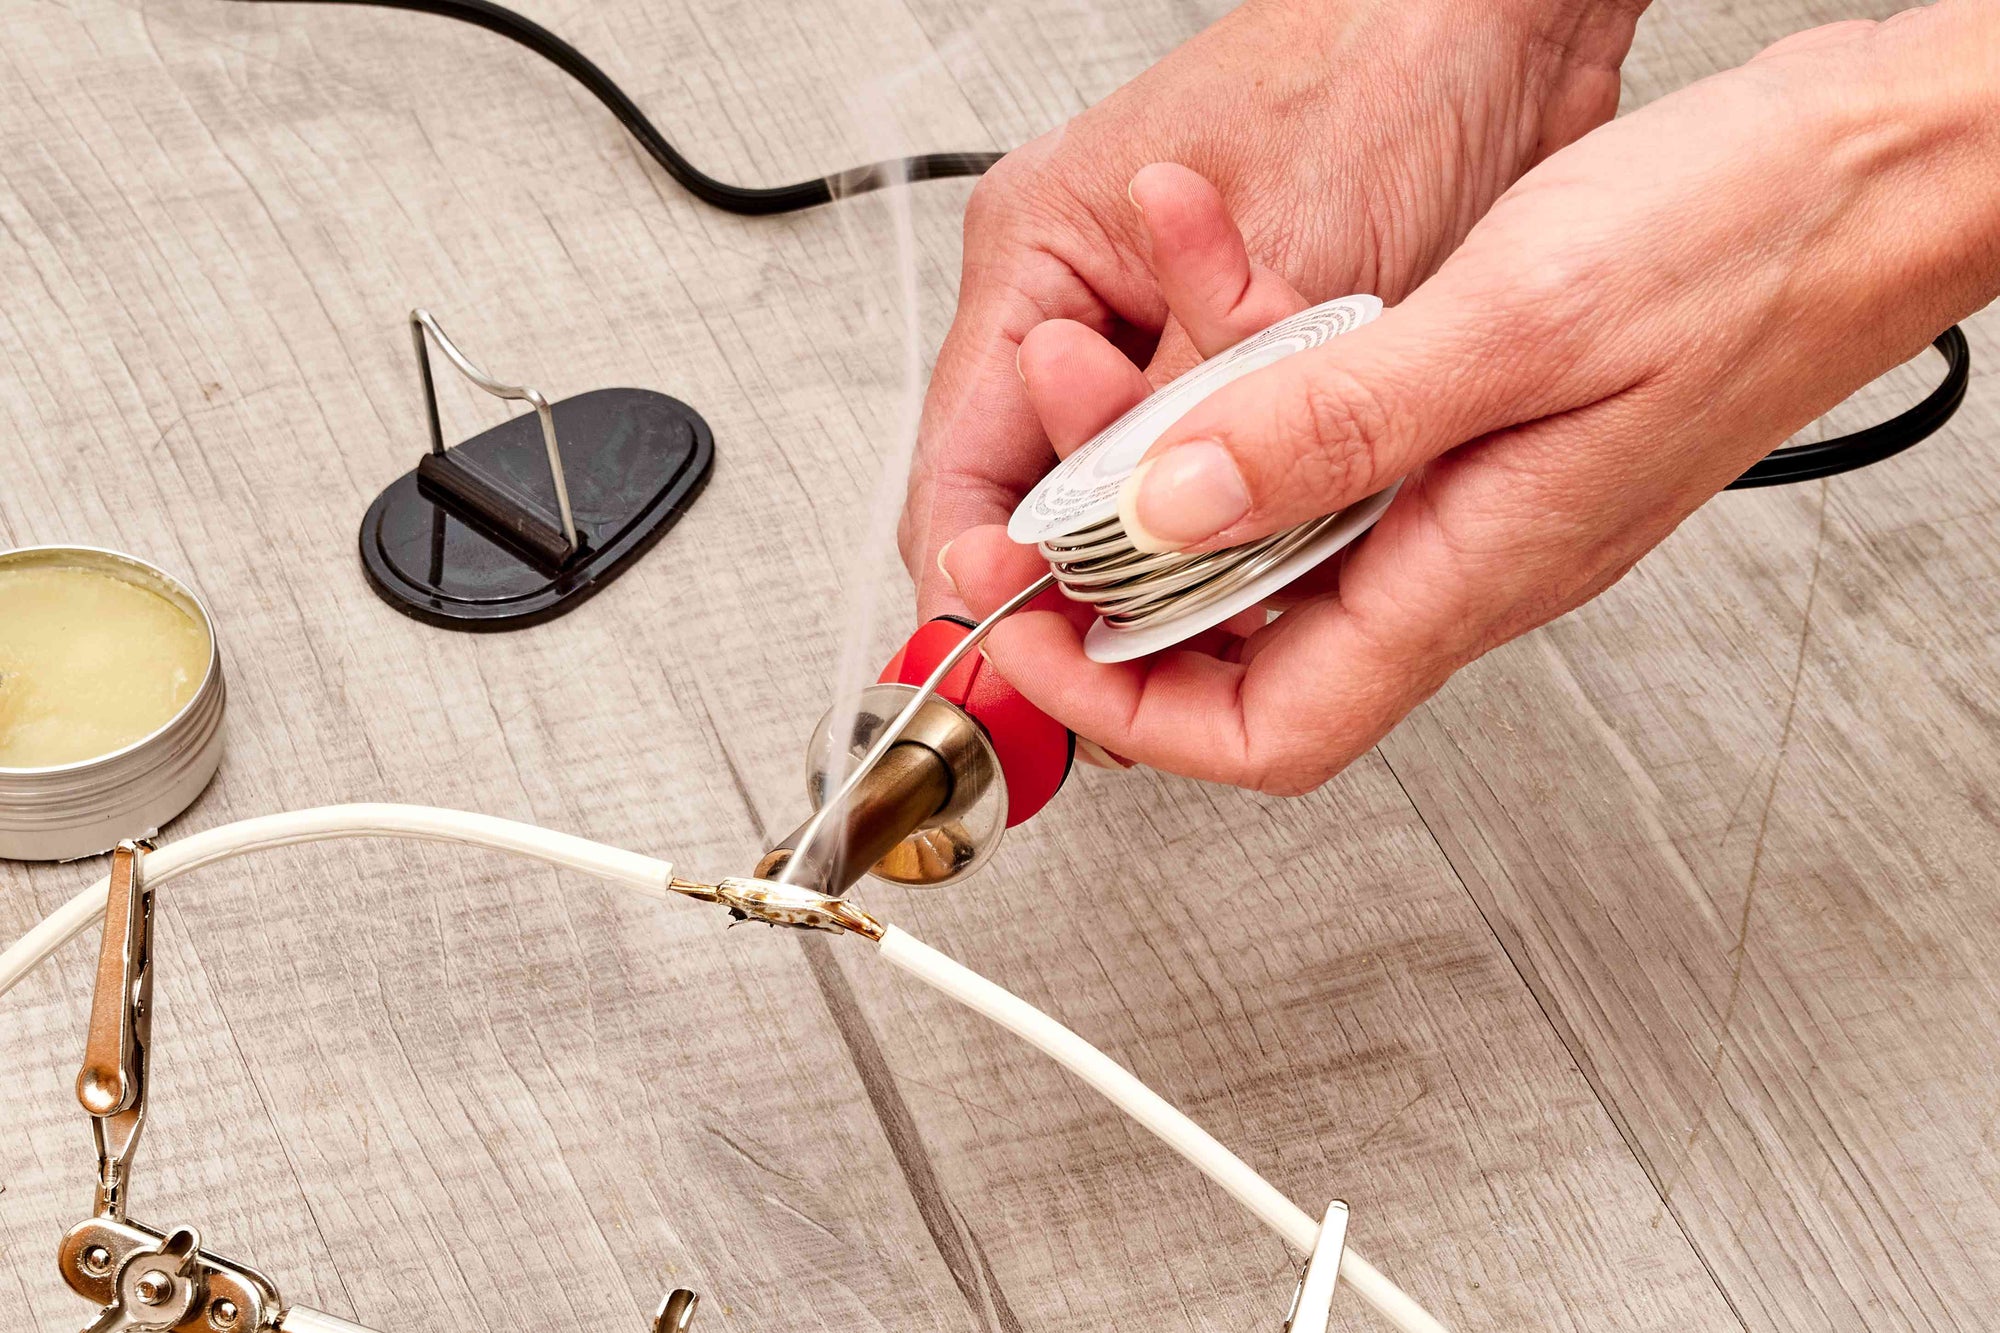 How to Solder a Wire to a Terminal - SolderStick